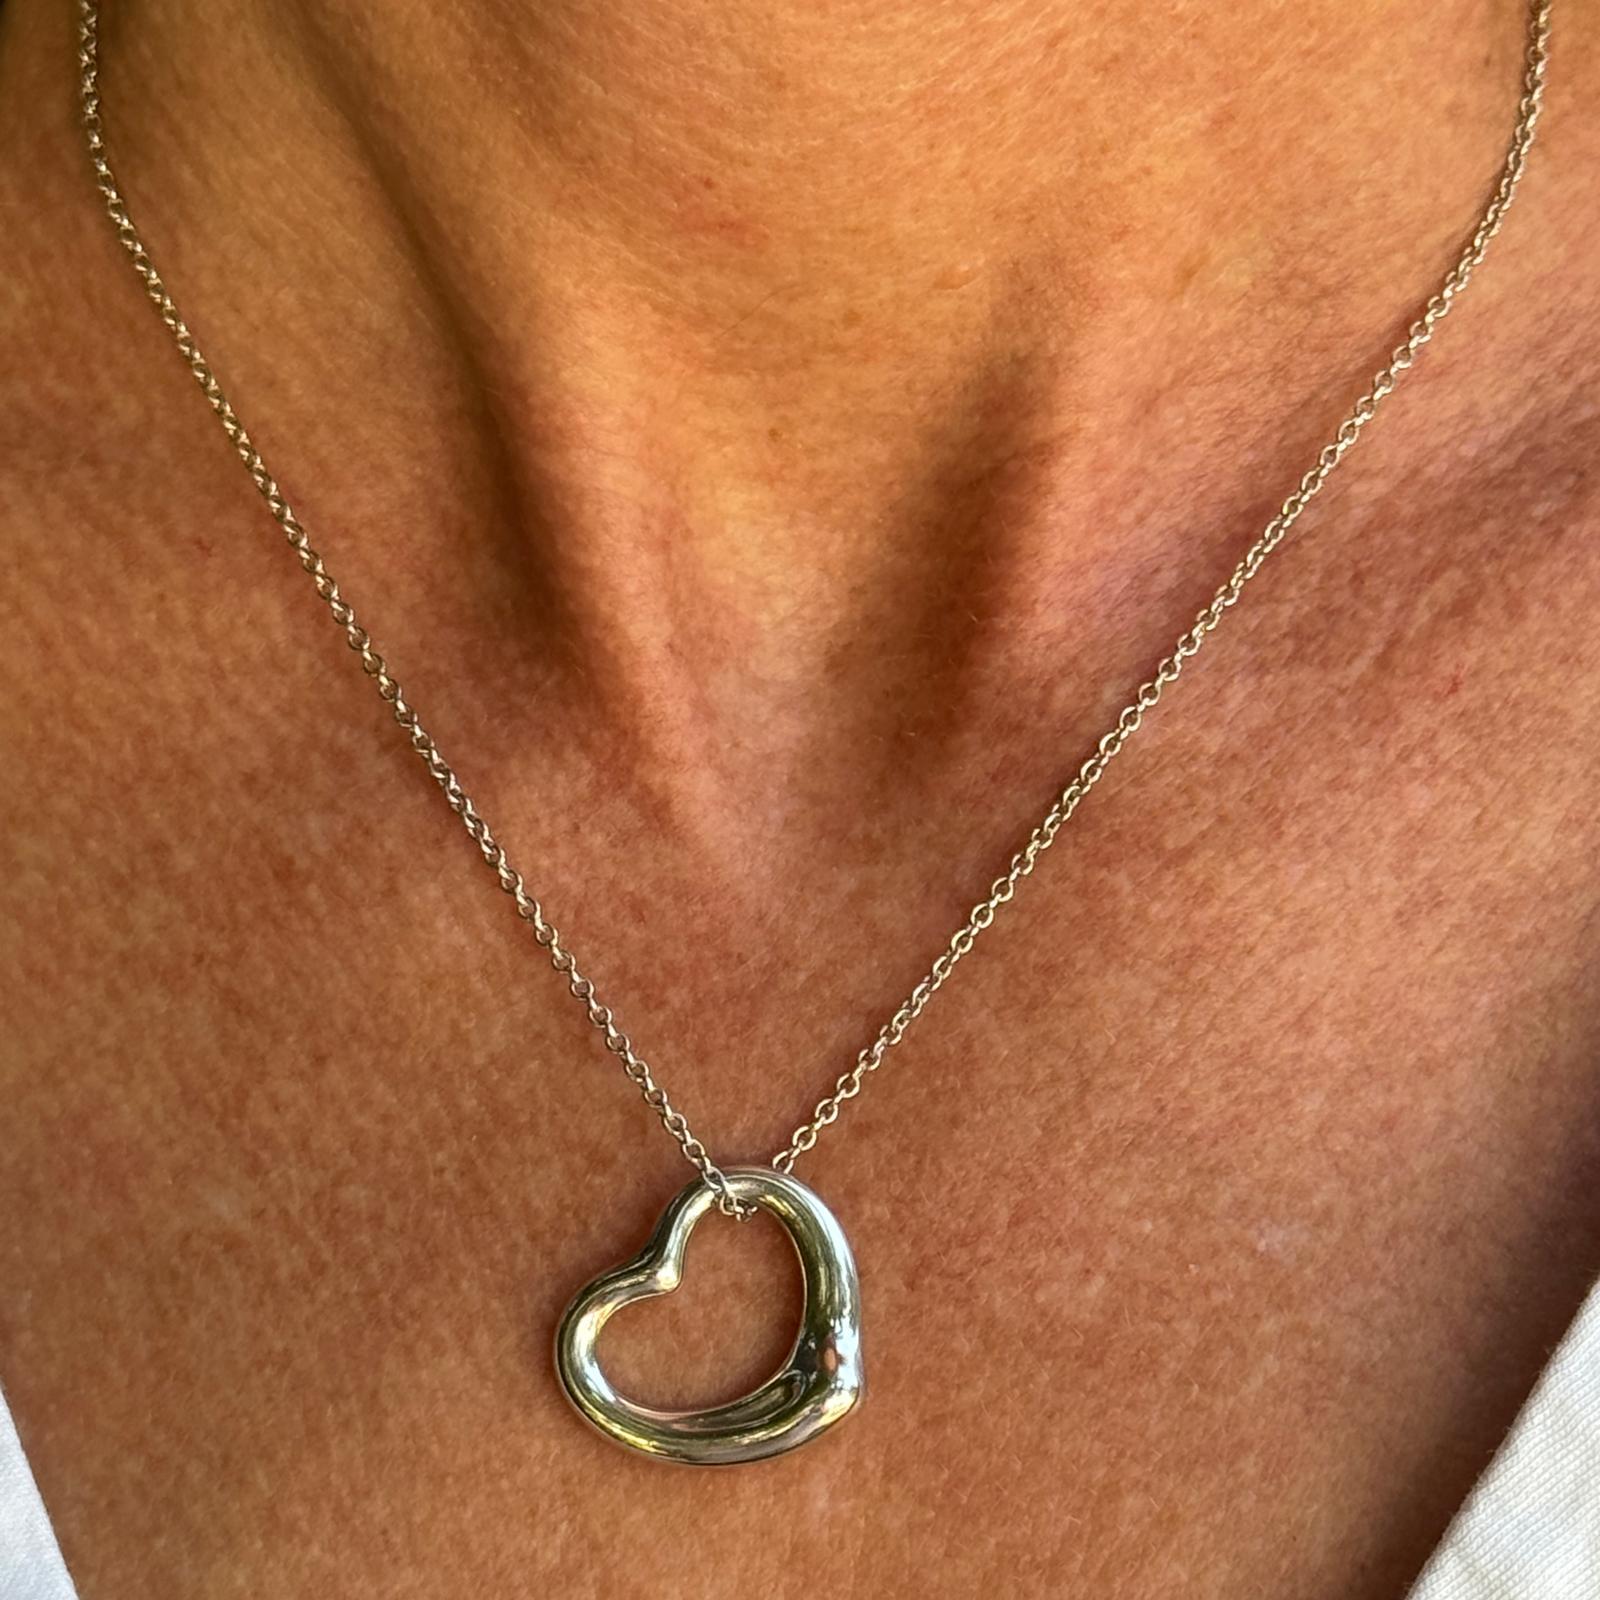 Tiffany & Co. Elsa Peretti open heart pendant fashioned in sterling silver. The pendant measures 20mm and the necklace measures 16 inches in length. Signed Tiffany & Co. Elsa Peretti 925 Spain. Weight: 6.8 grams.